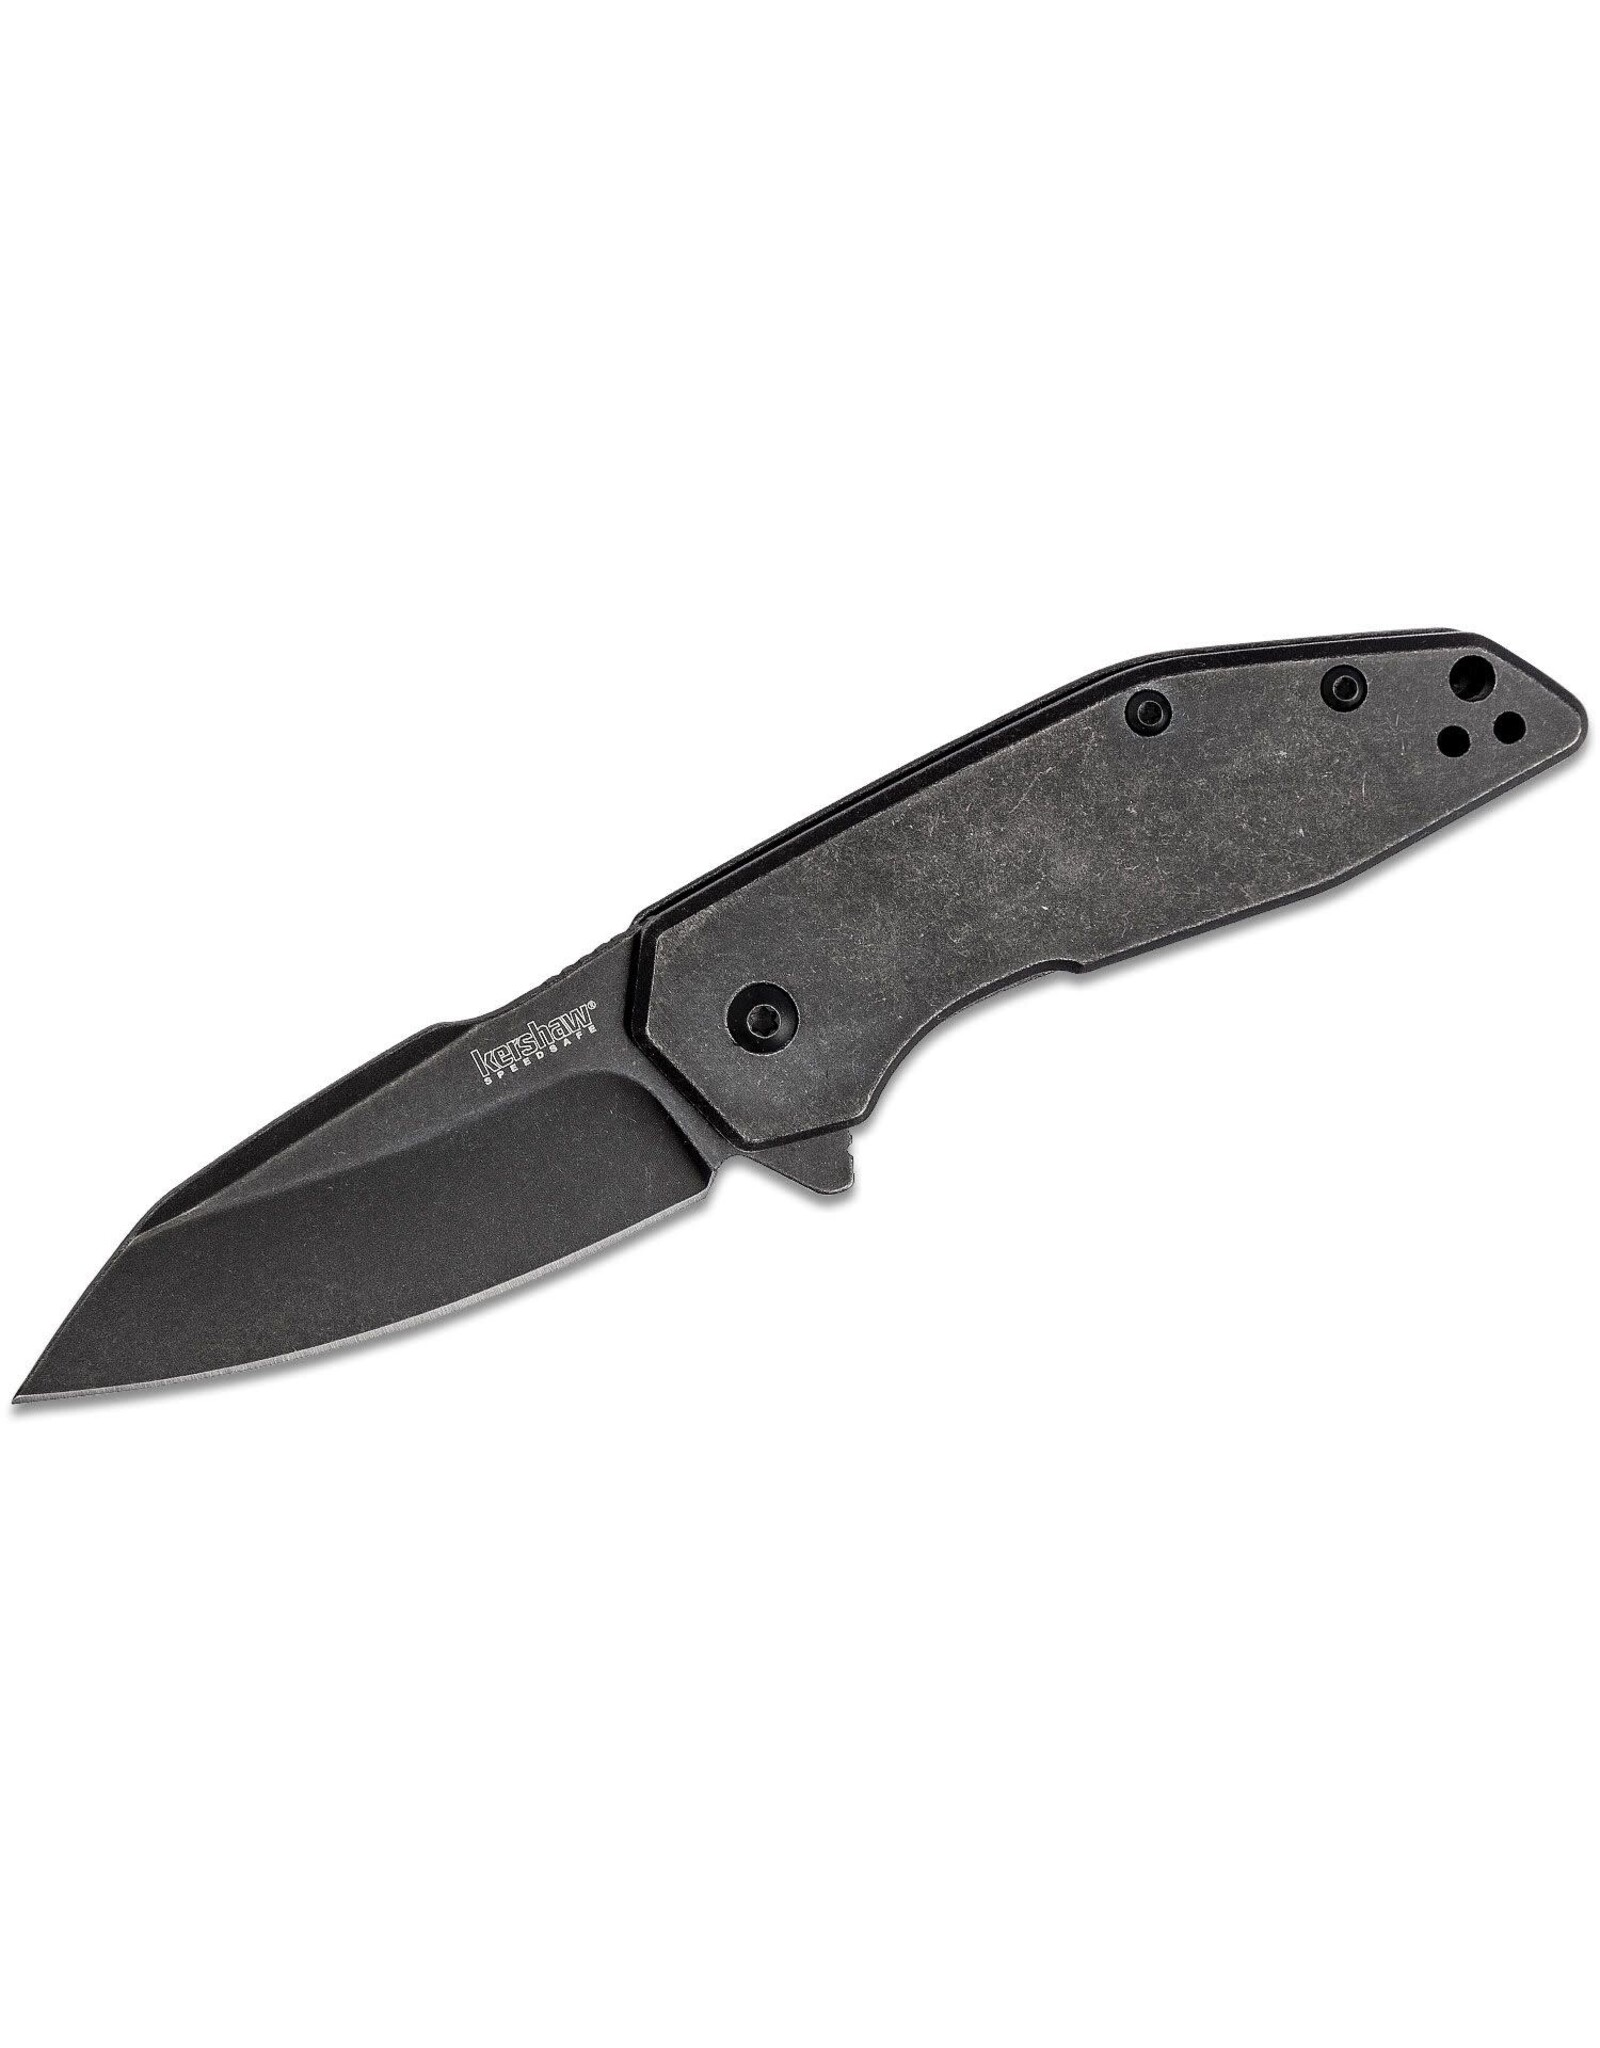 kershaw Kershaw 2065 Gravel Assisted Flipper Knife 2.5" BlackWashed Reverse Tanto Blade and Stainless Steel Handles, Frame Lock